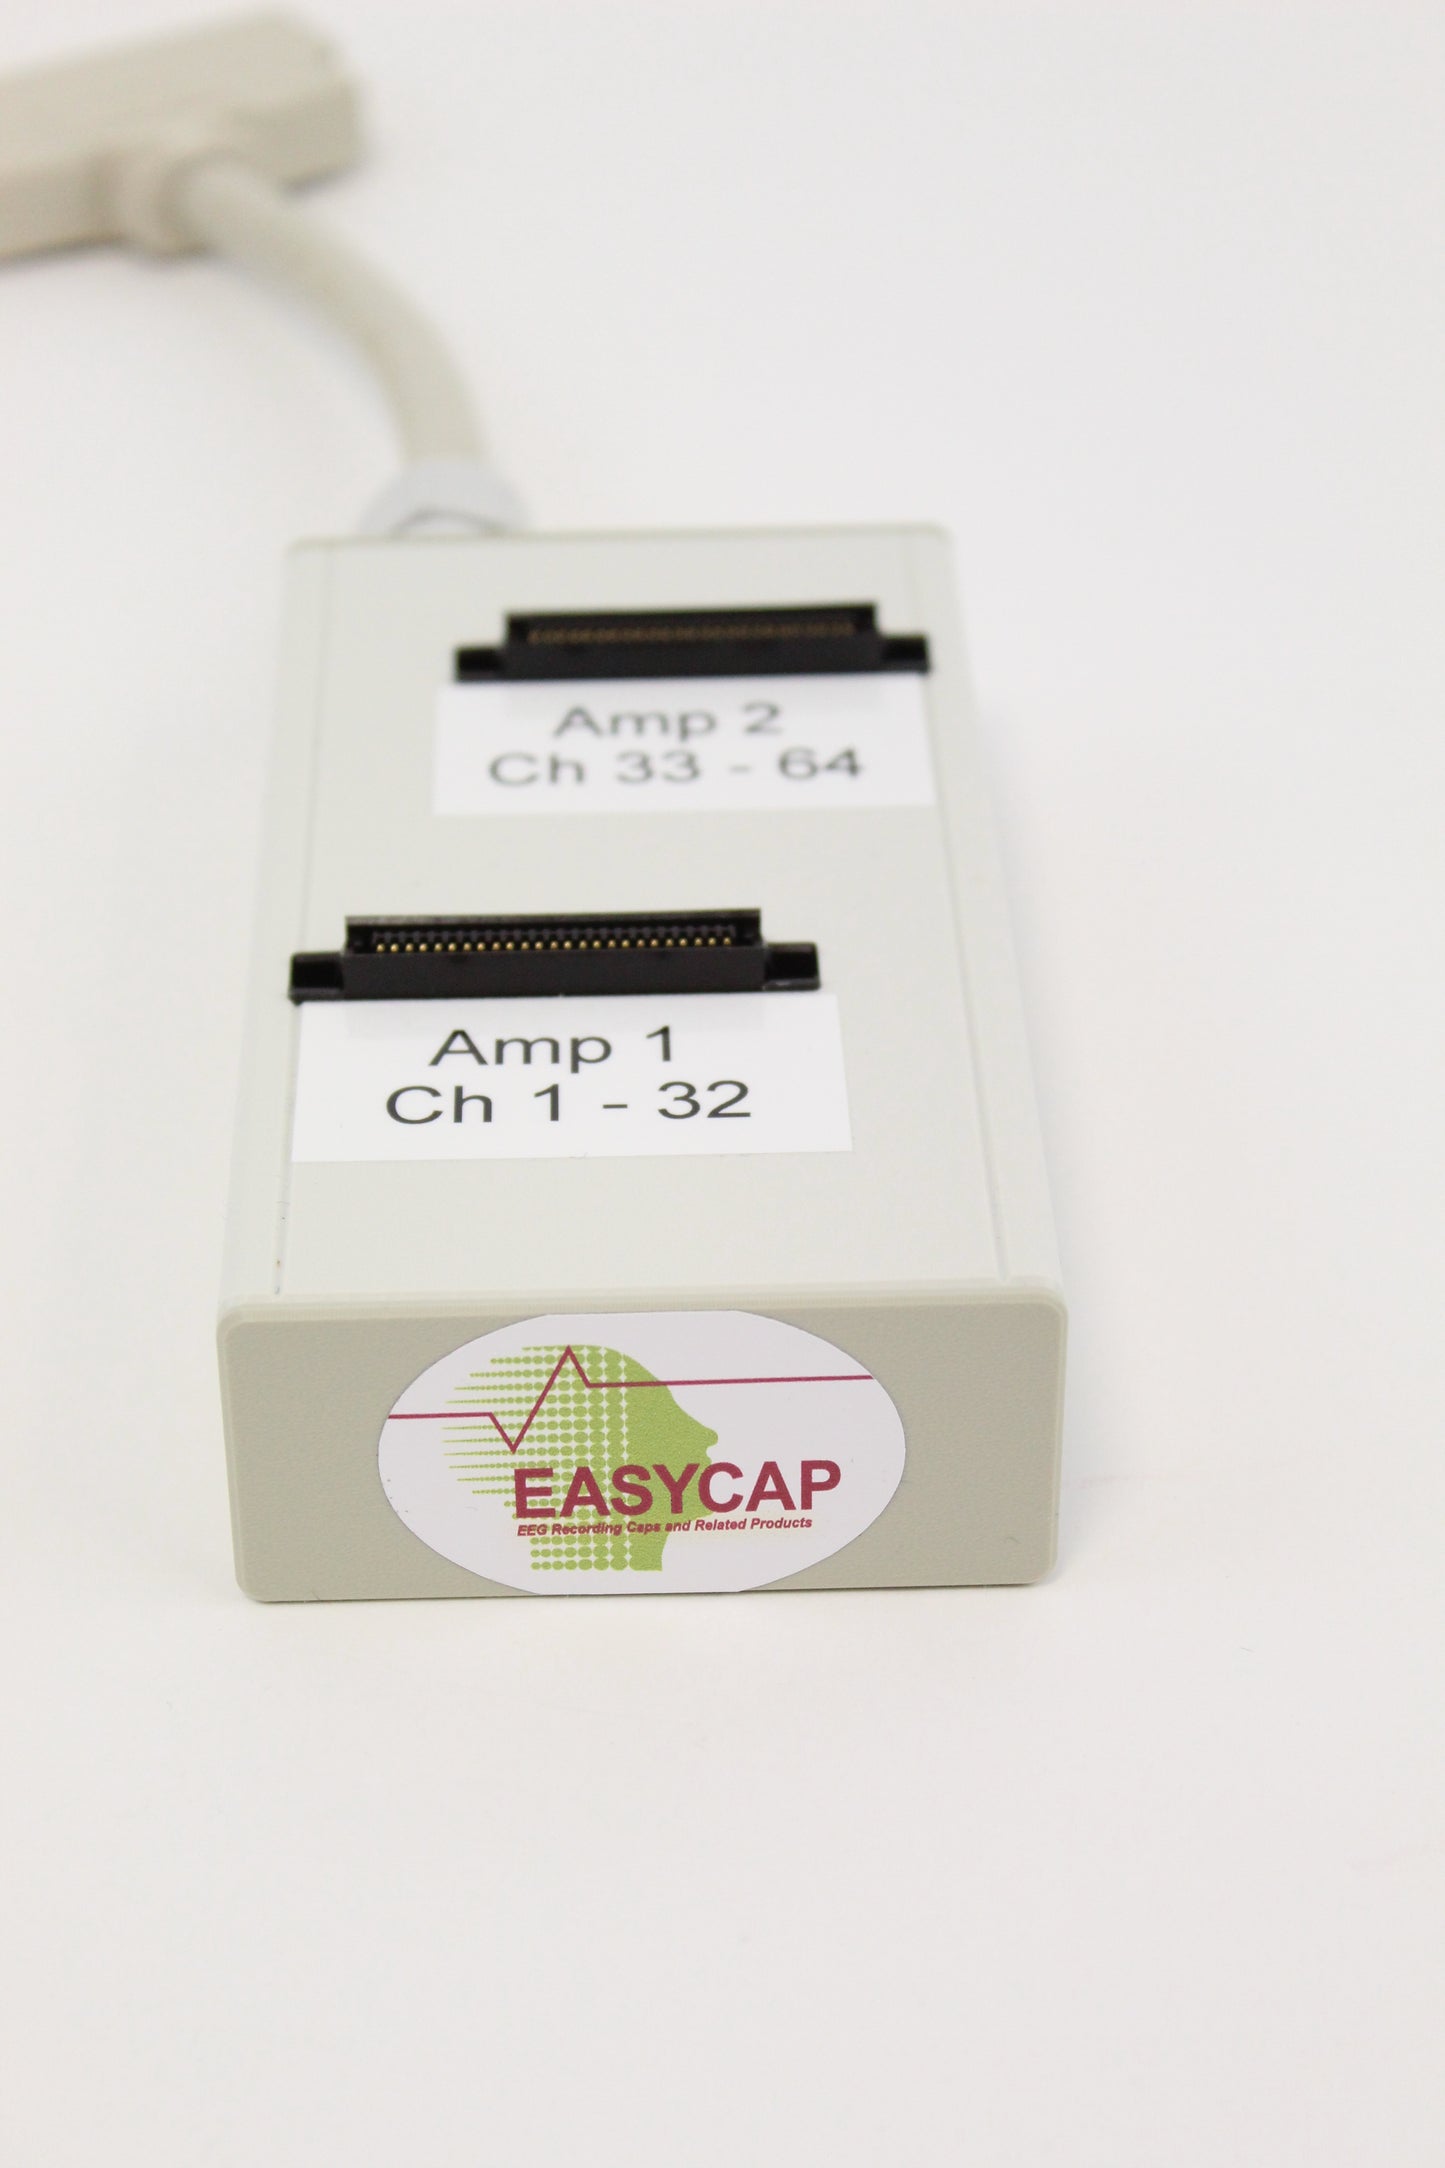 64Ch connector adapter from BrainCap to SynAmp 2/RT